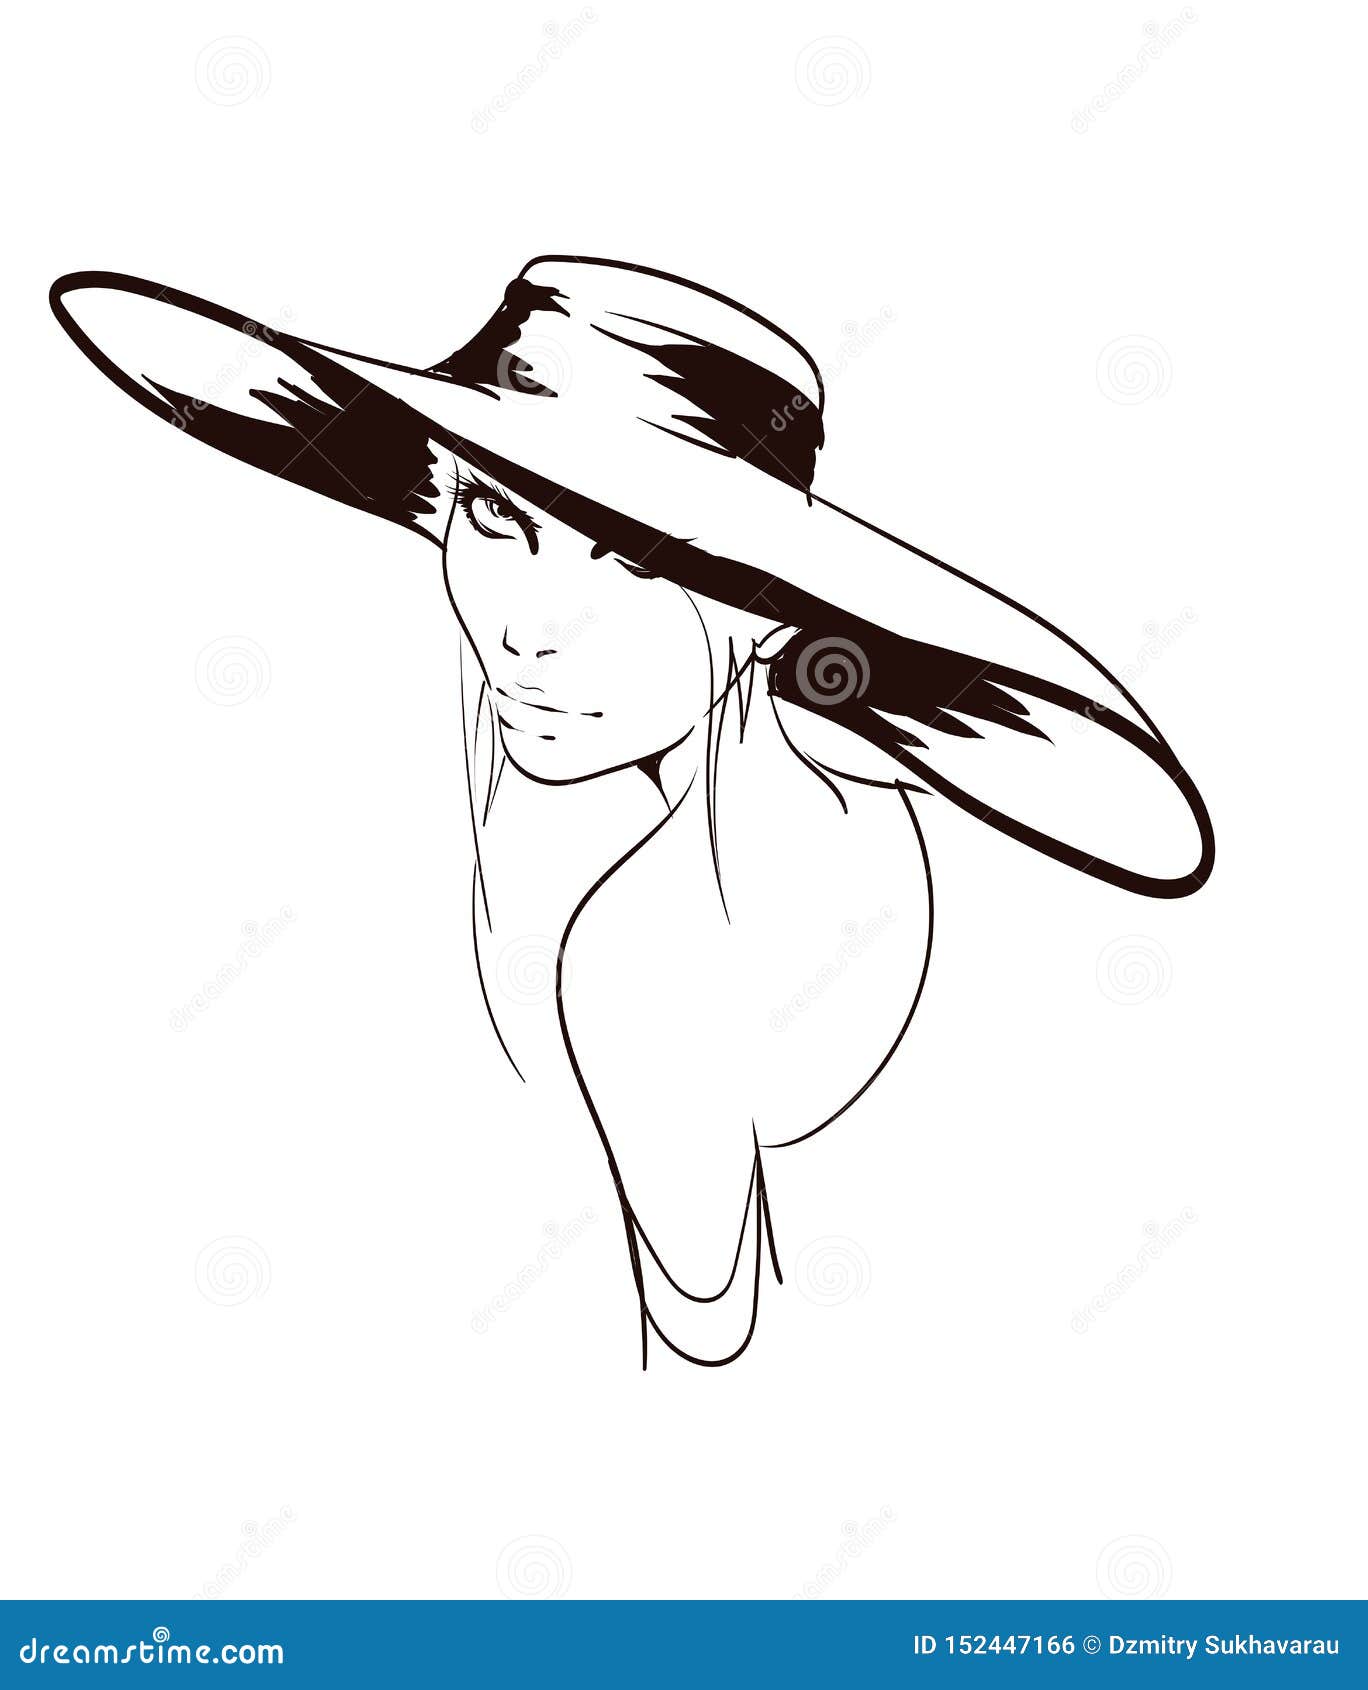 Fashion illustration. hand drawn sketch of a lady in a wide brim hat. Hand  drawn sketch of a lady wearing a shaded glasses | CanStock